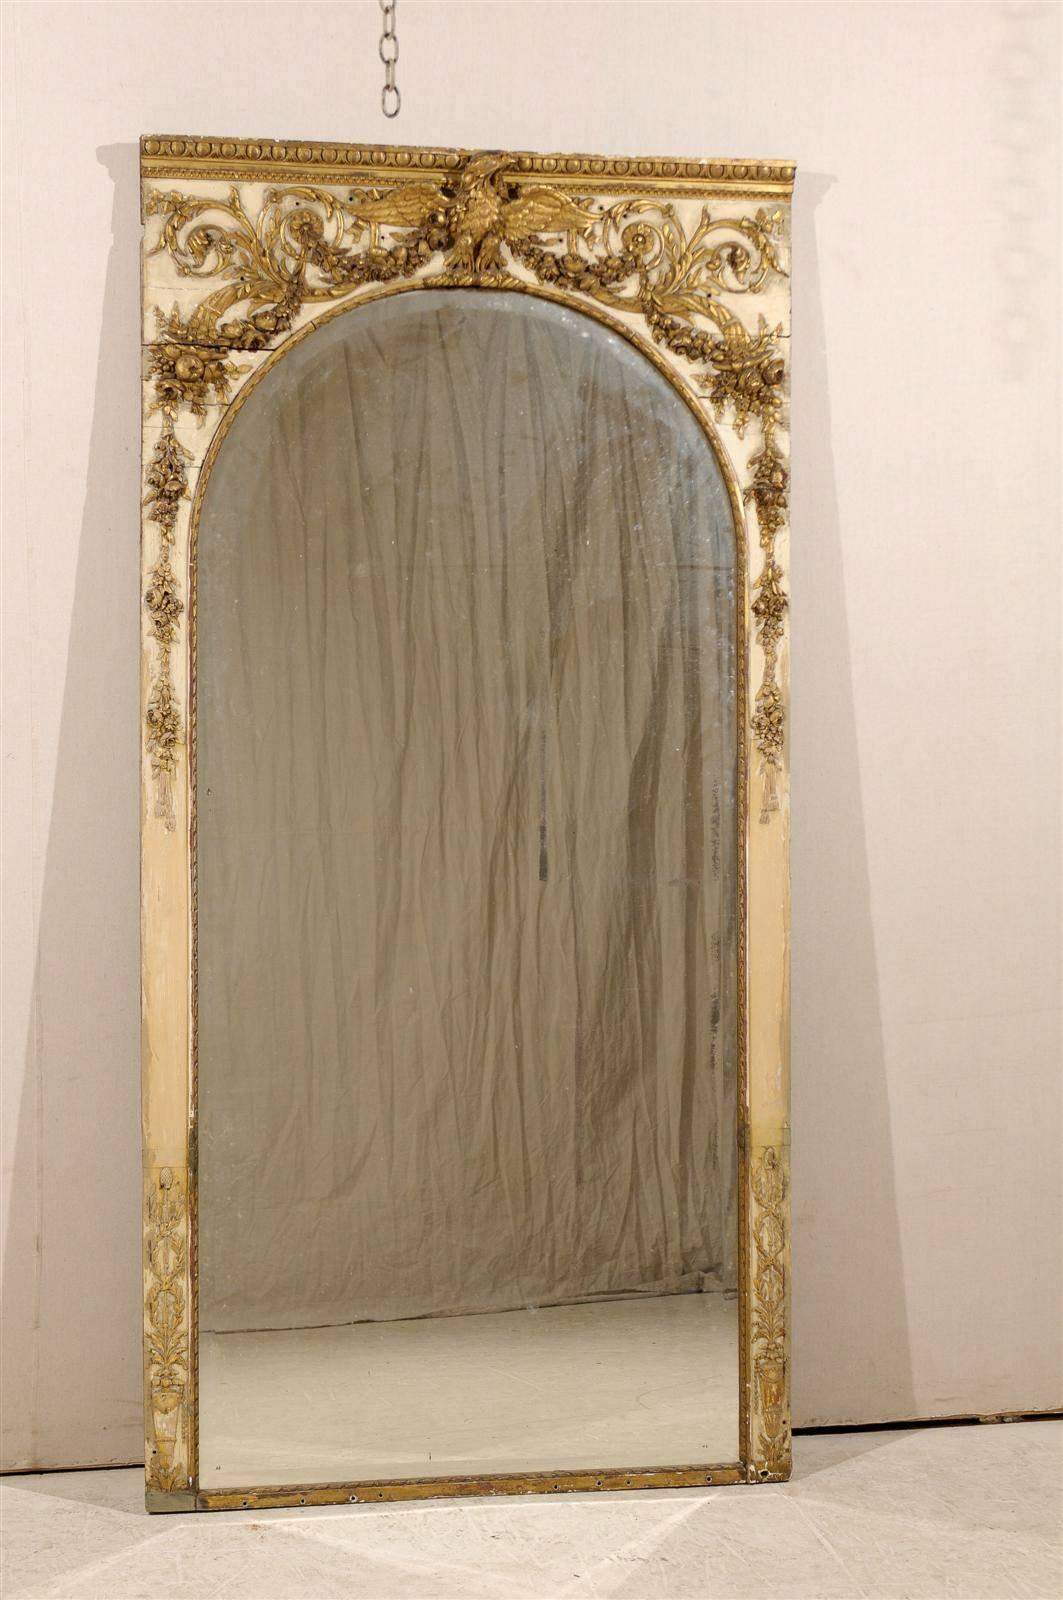 A large size French early 19th century painted and gilded wood pier mirror with original paint and wonderful details featuring an eagle at the crest, cornucopias, rinceaux and egg and dart molding.